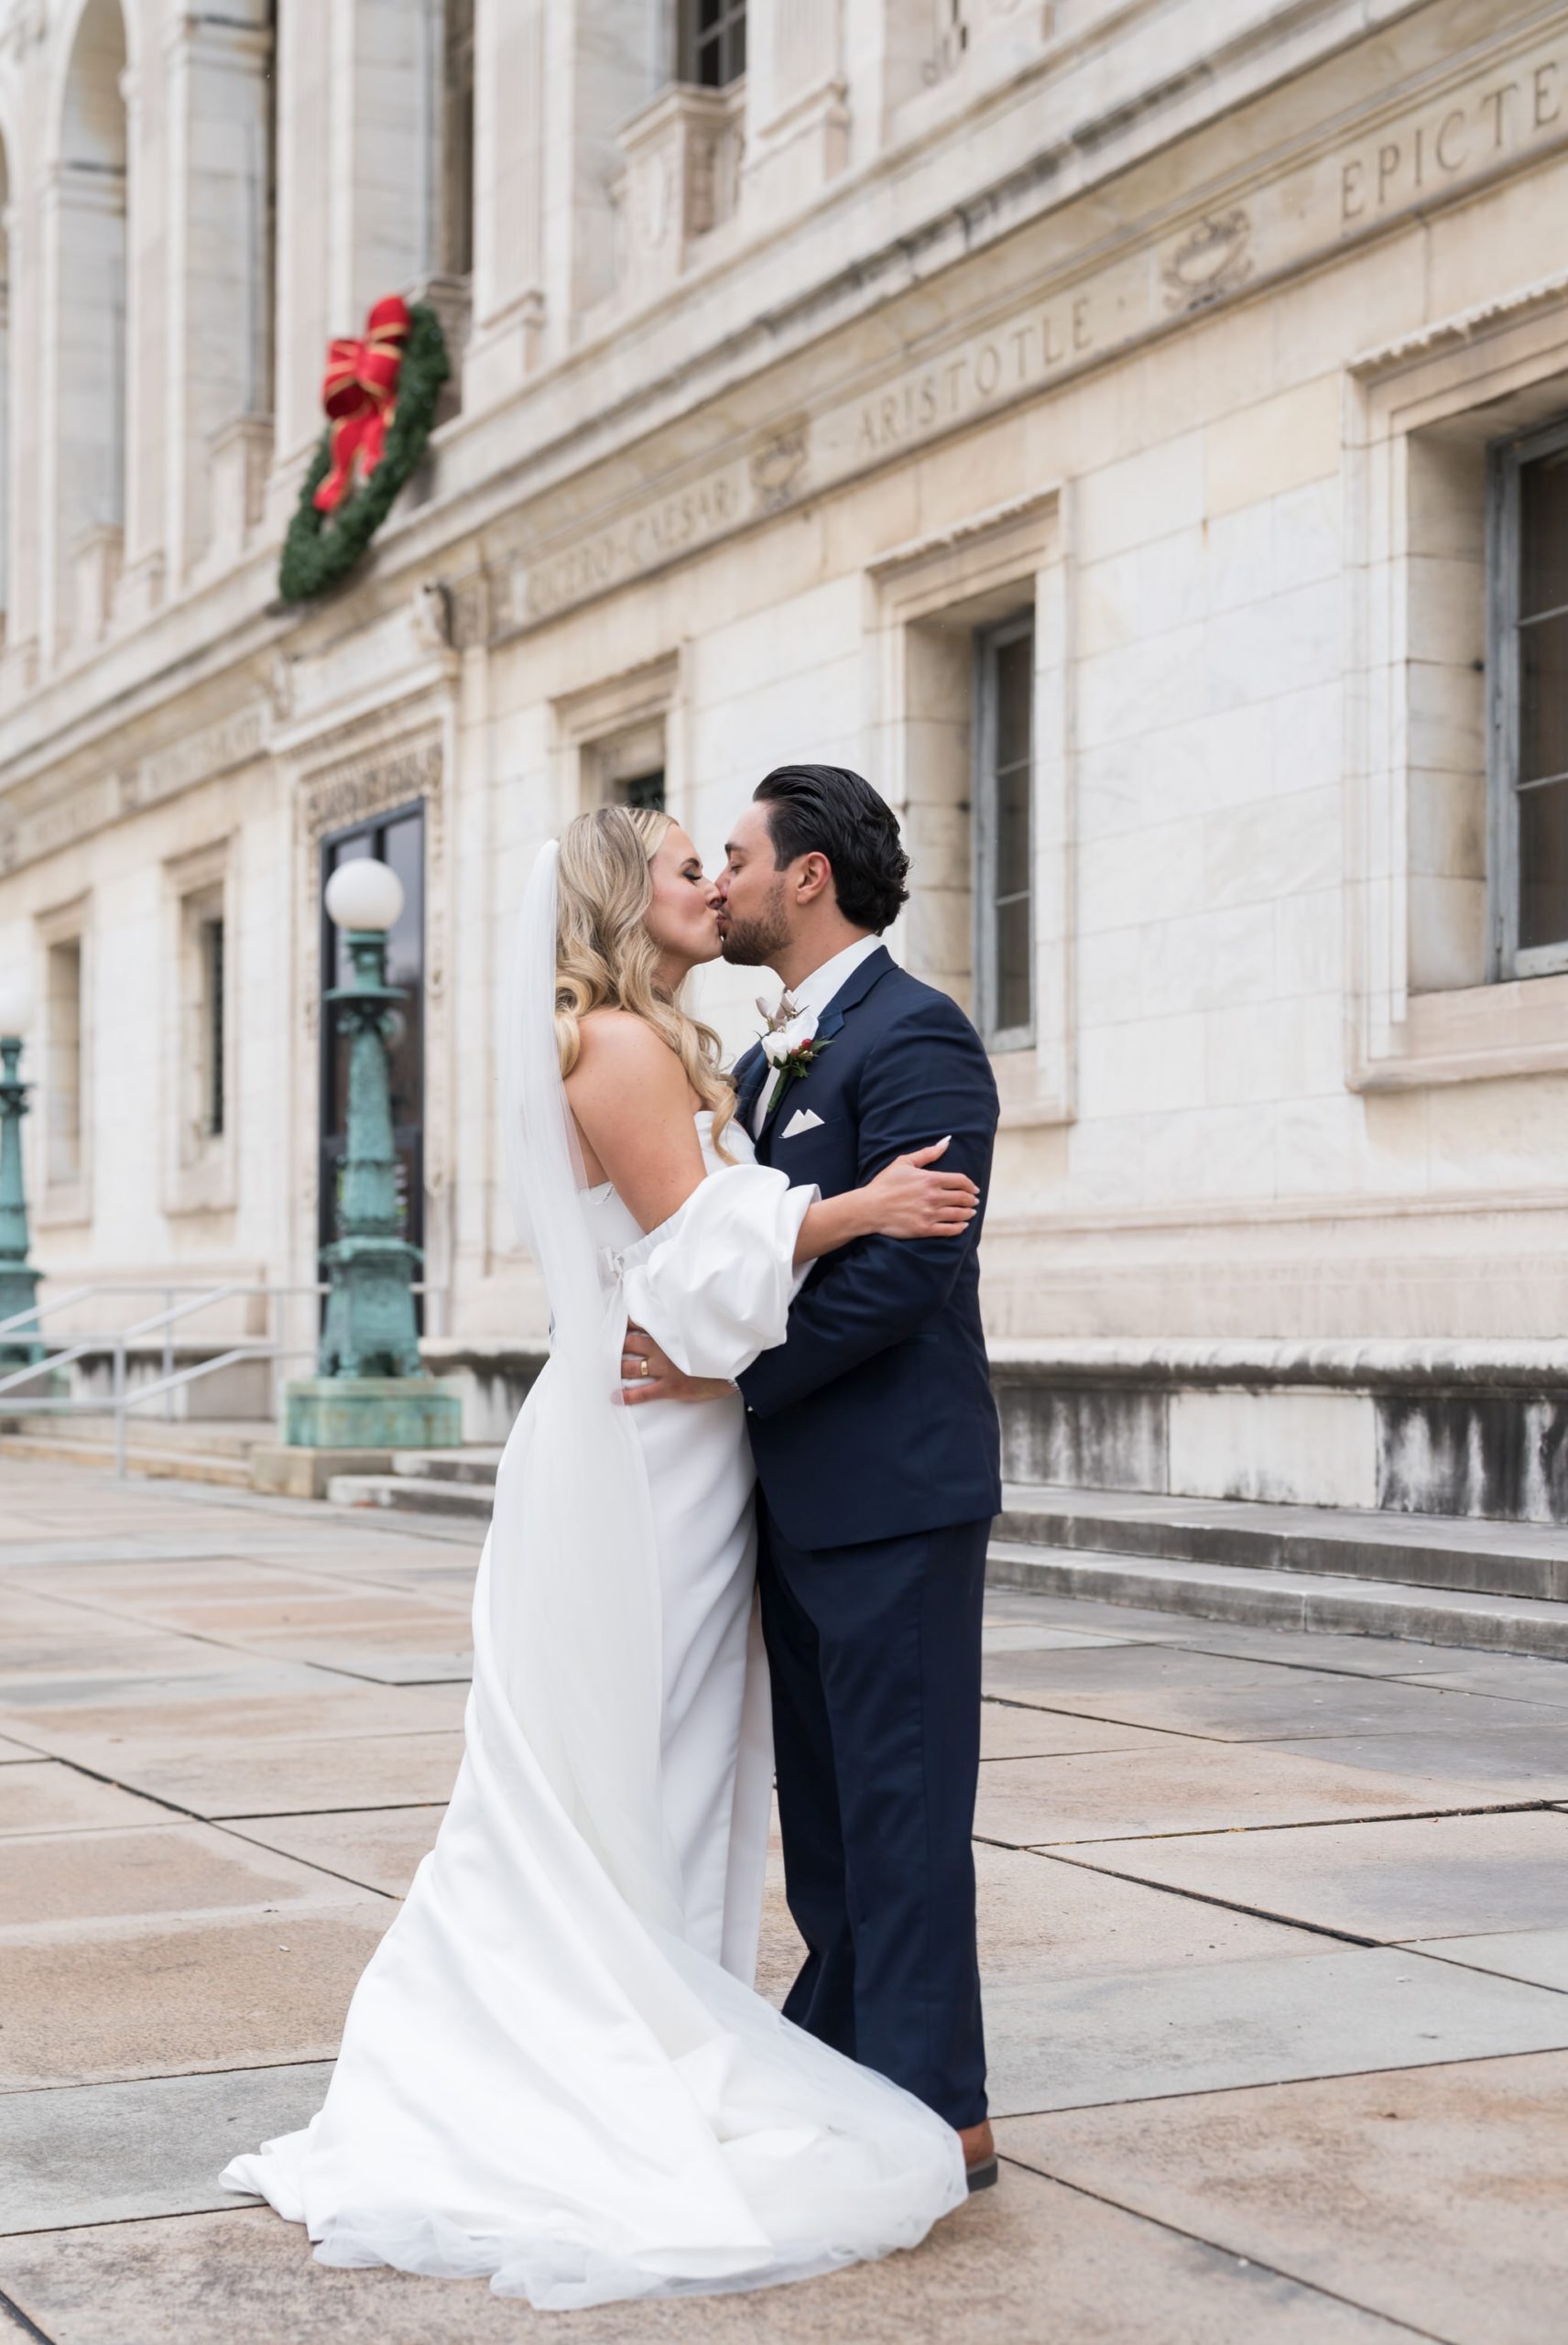 A couple embraces and kisses on their wedding day at the Detroit Public Library.